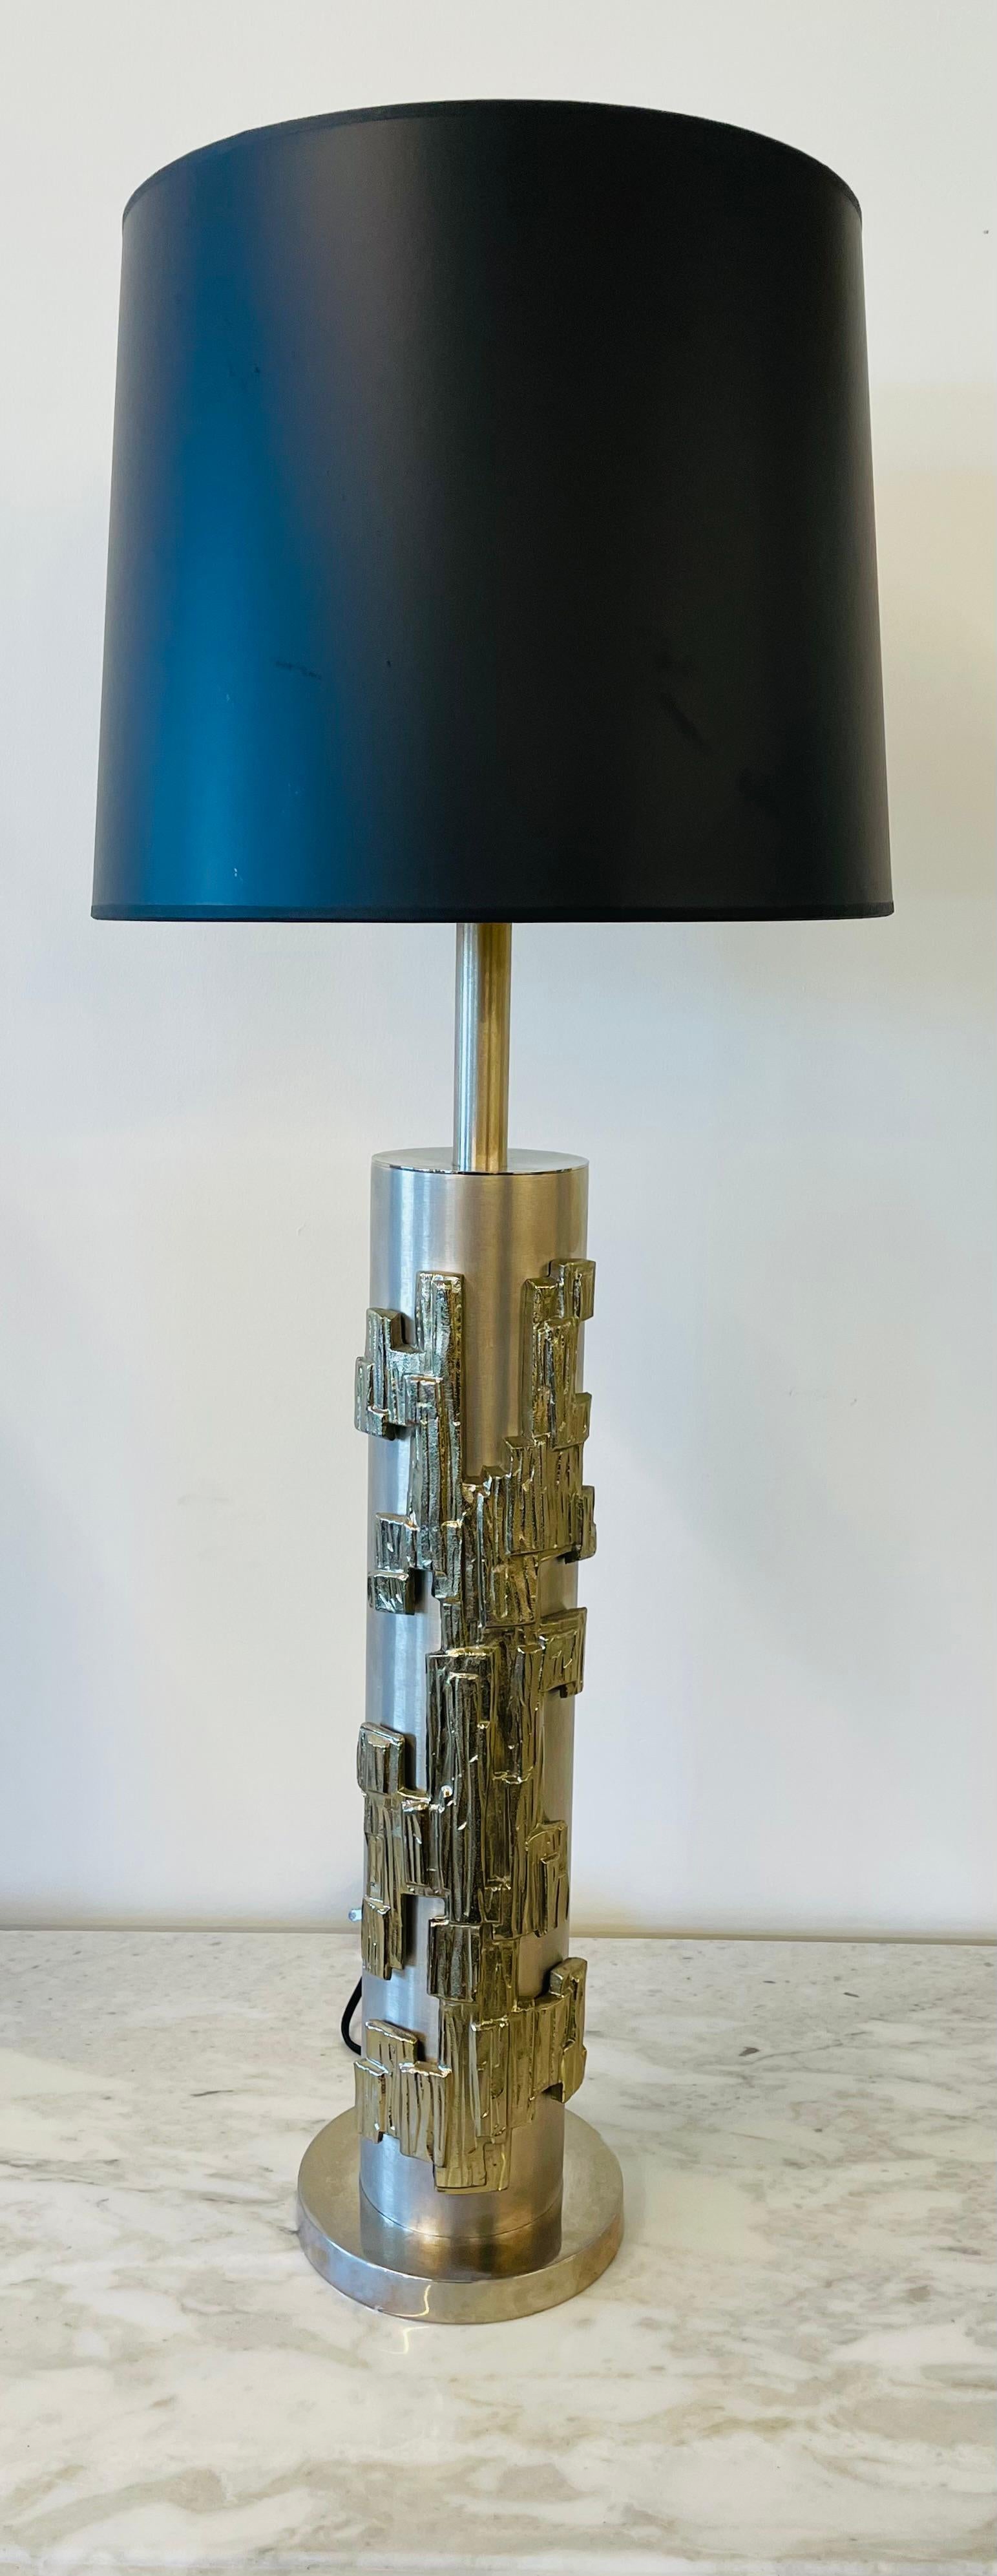 Pair of Modernist Table Lamps, Brushed Nickel and Sculptural Metal, 1970s For Sale 6